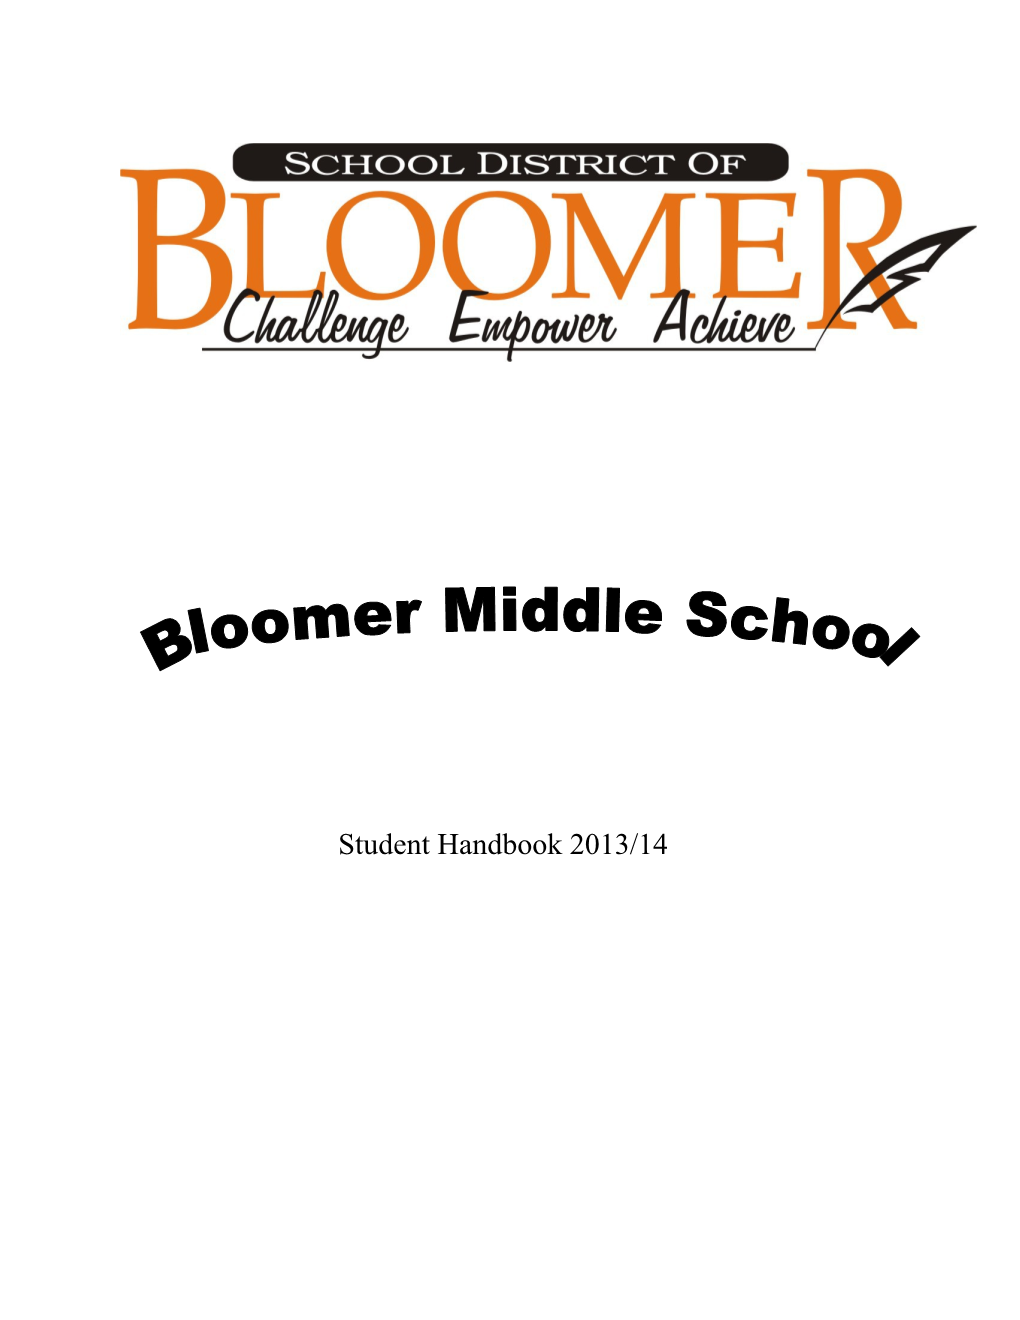 Bloomer Middle School